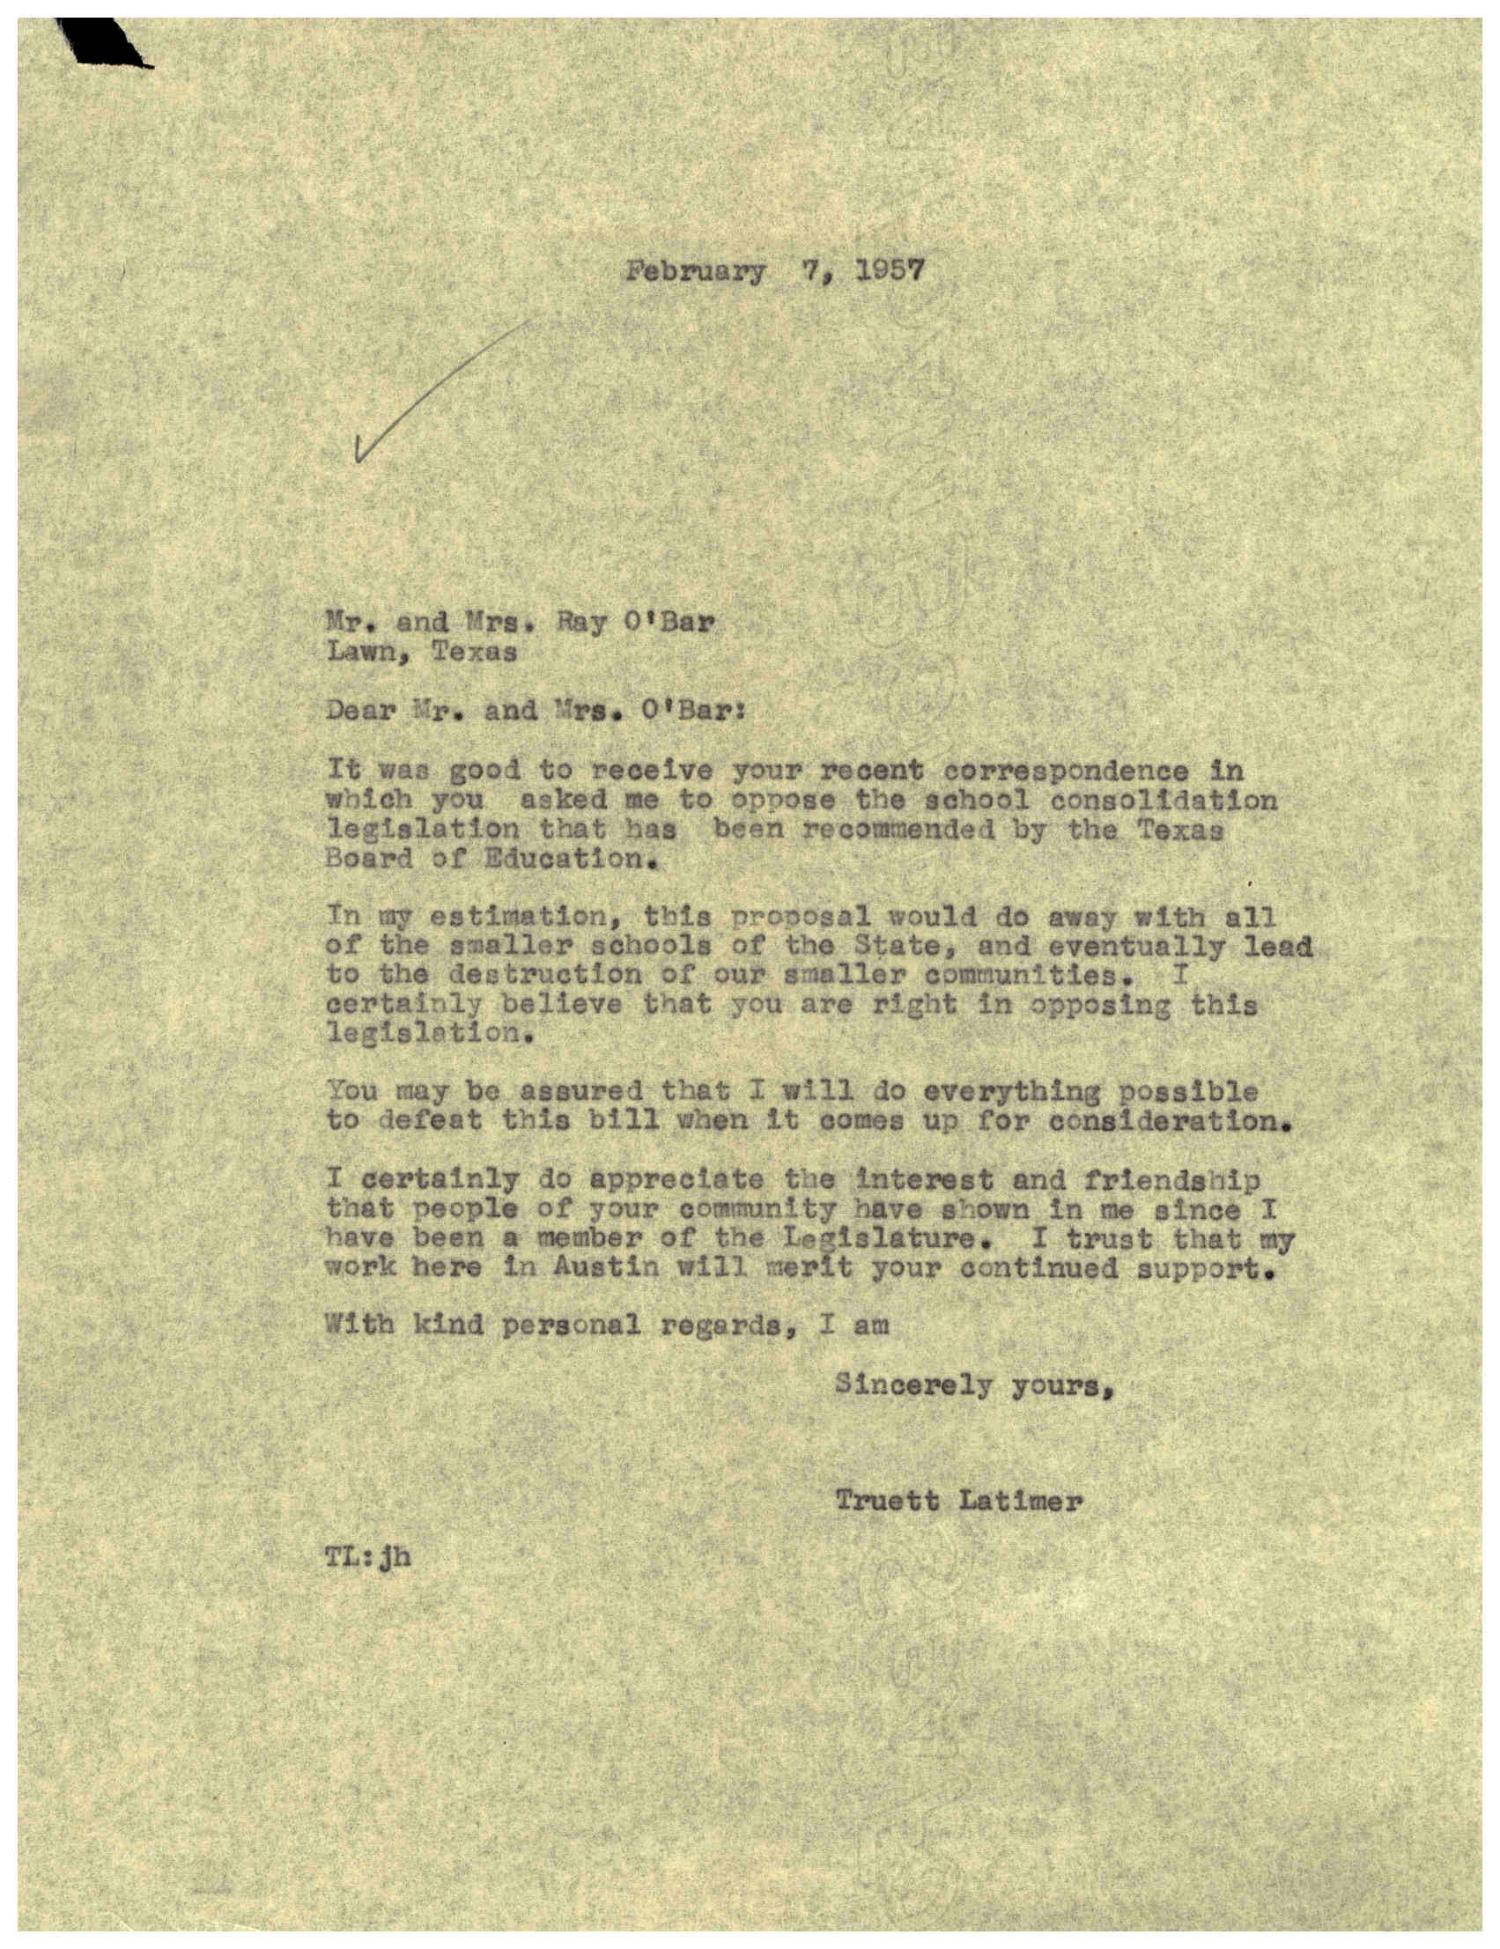 [Letter from Truett Latimer to Mr. and Mrs. Ray O'Bar, February 7, 1957]
                                                
                                                    [Sequence #]: 1 of 1
                                                